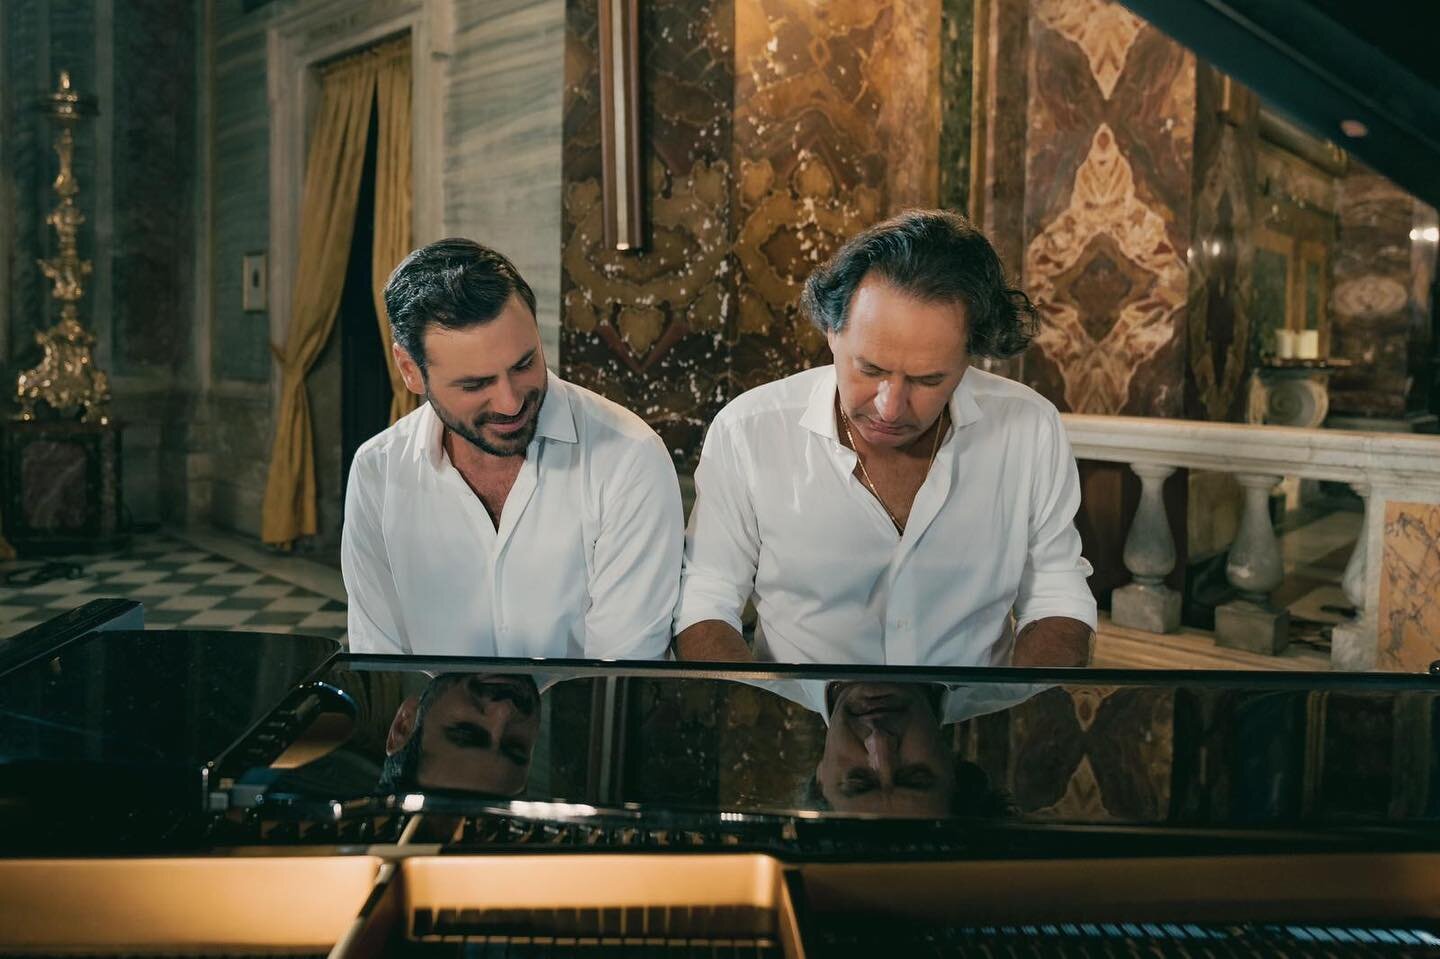 Two more days till the release of our beautiful song and videoclip @hausercello 🎻🔥 #themeforennio #enniomorricone